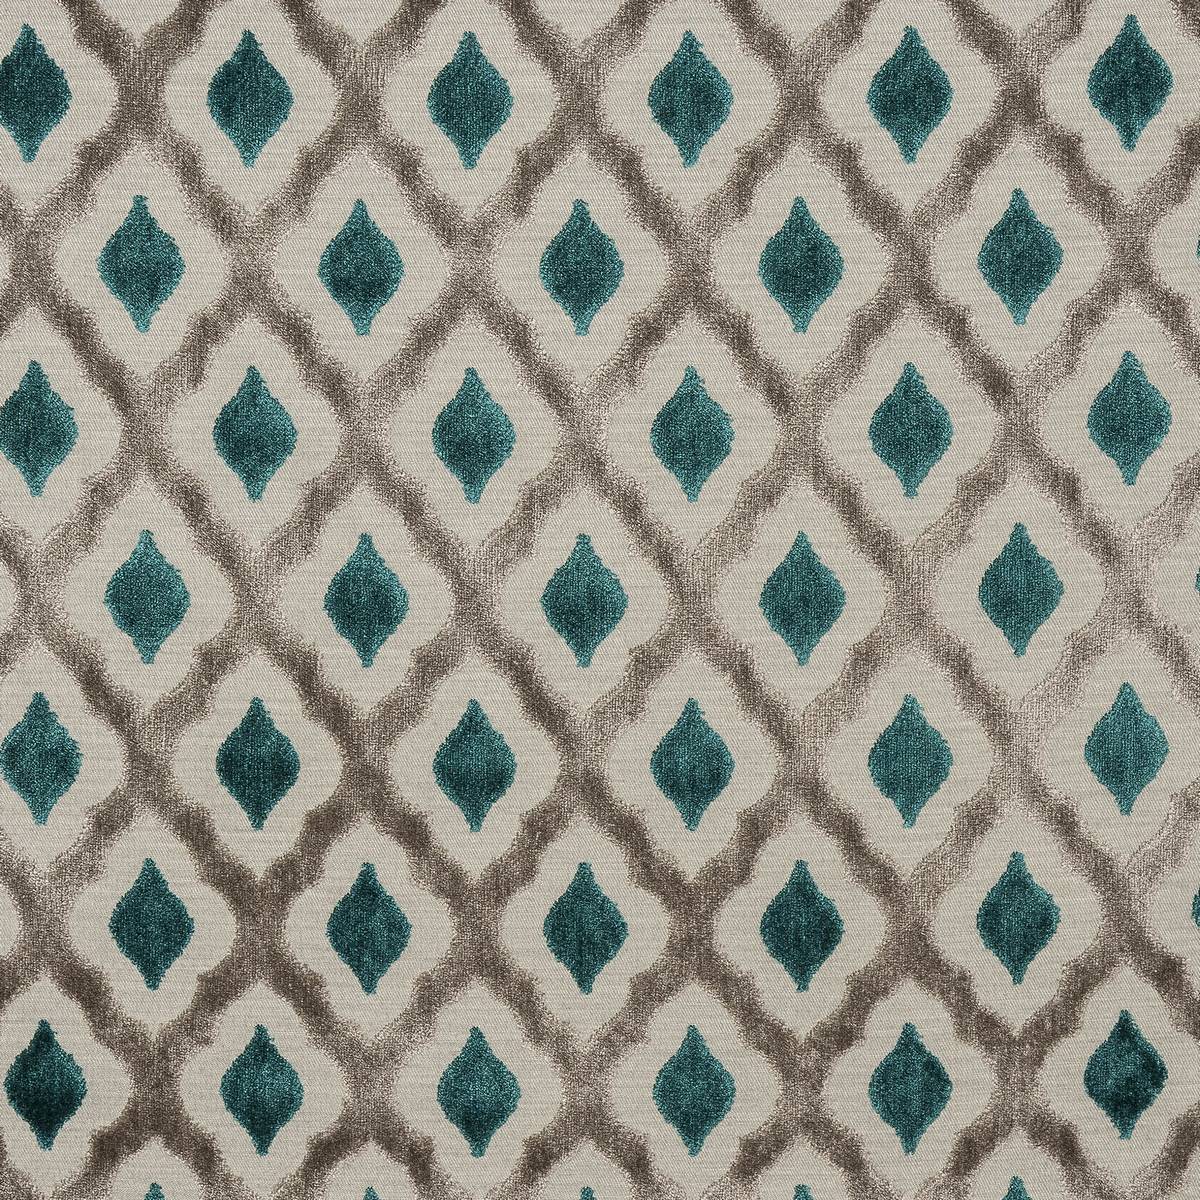 Assisi Teal Fabric by Porter & Stone